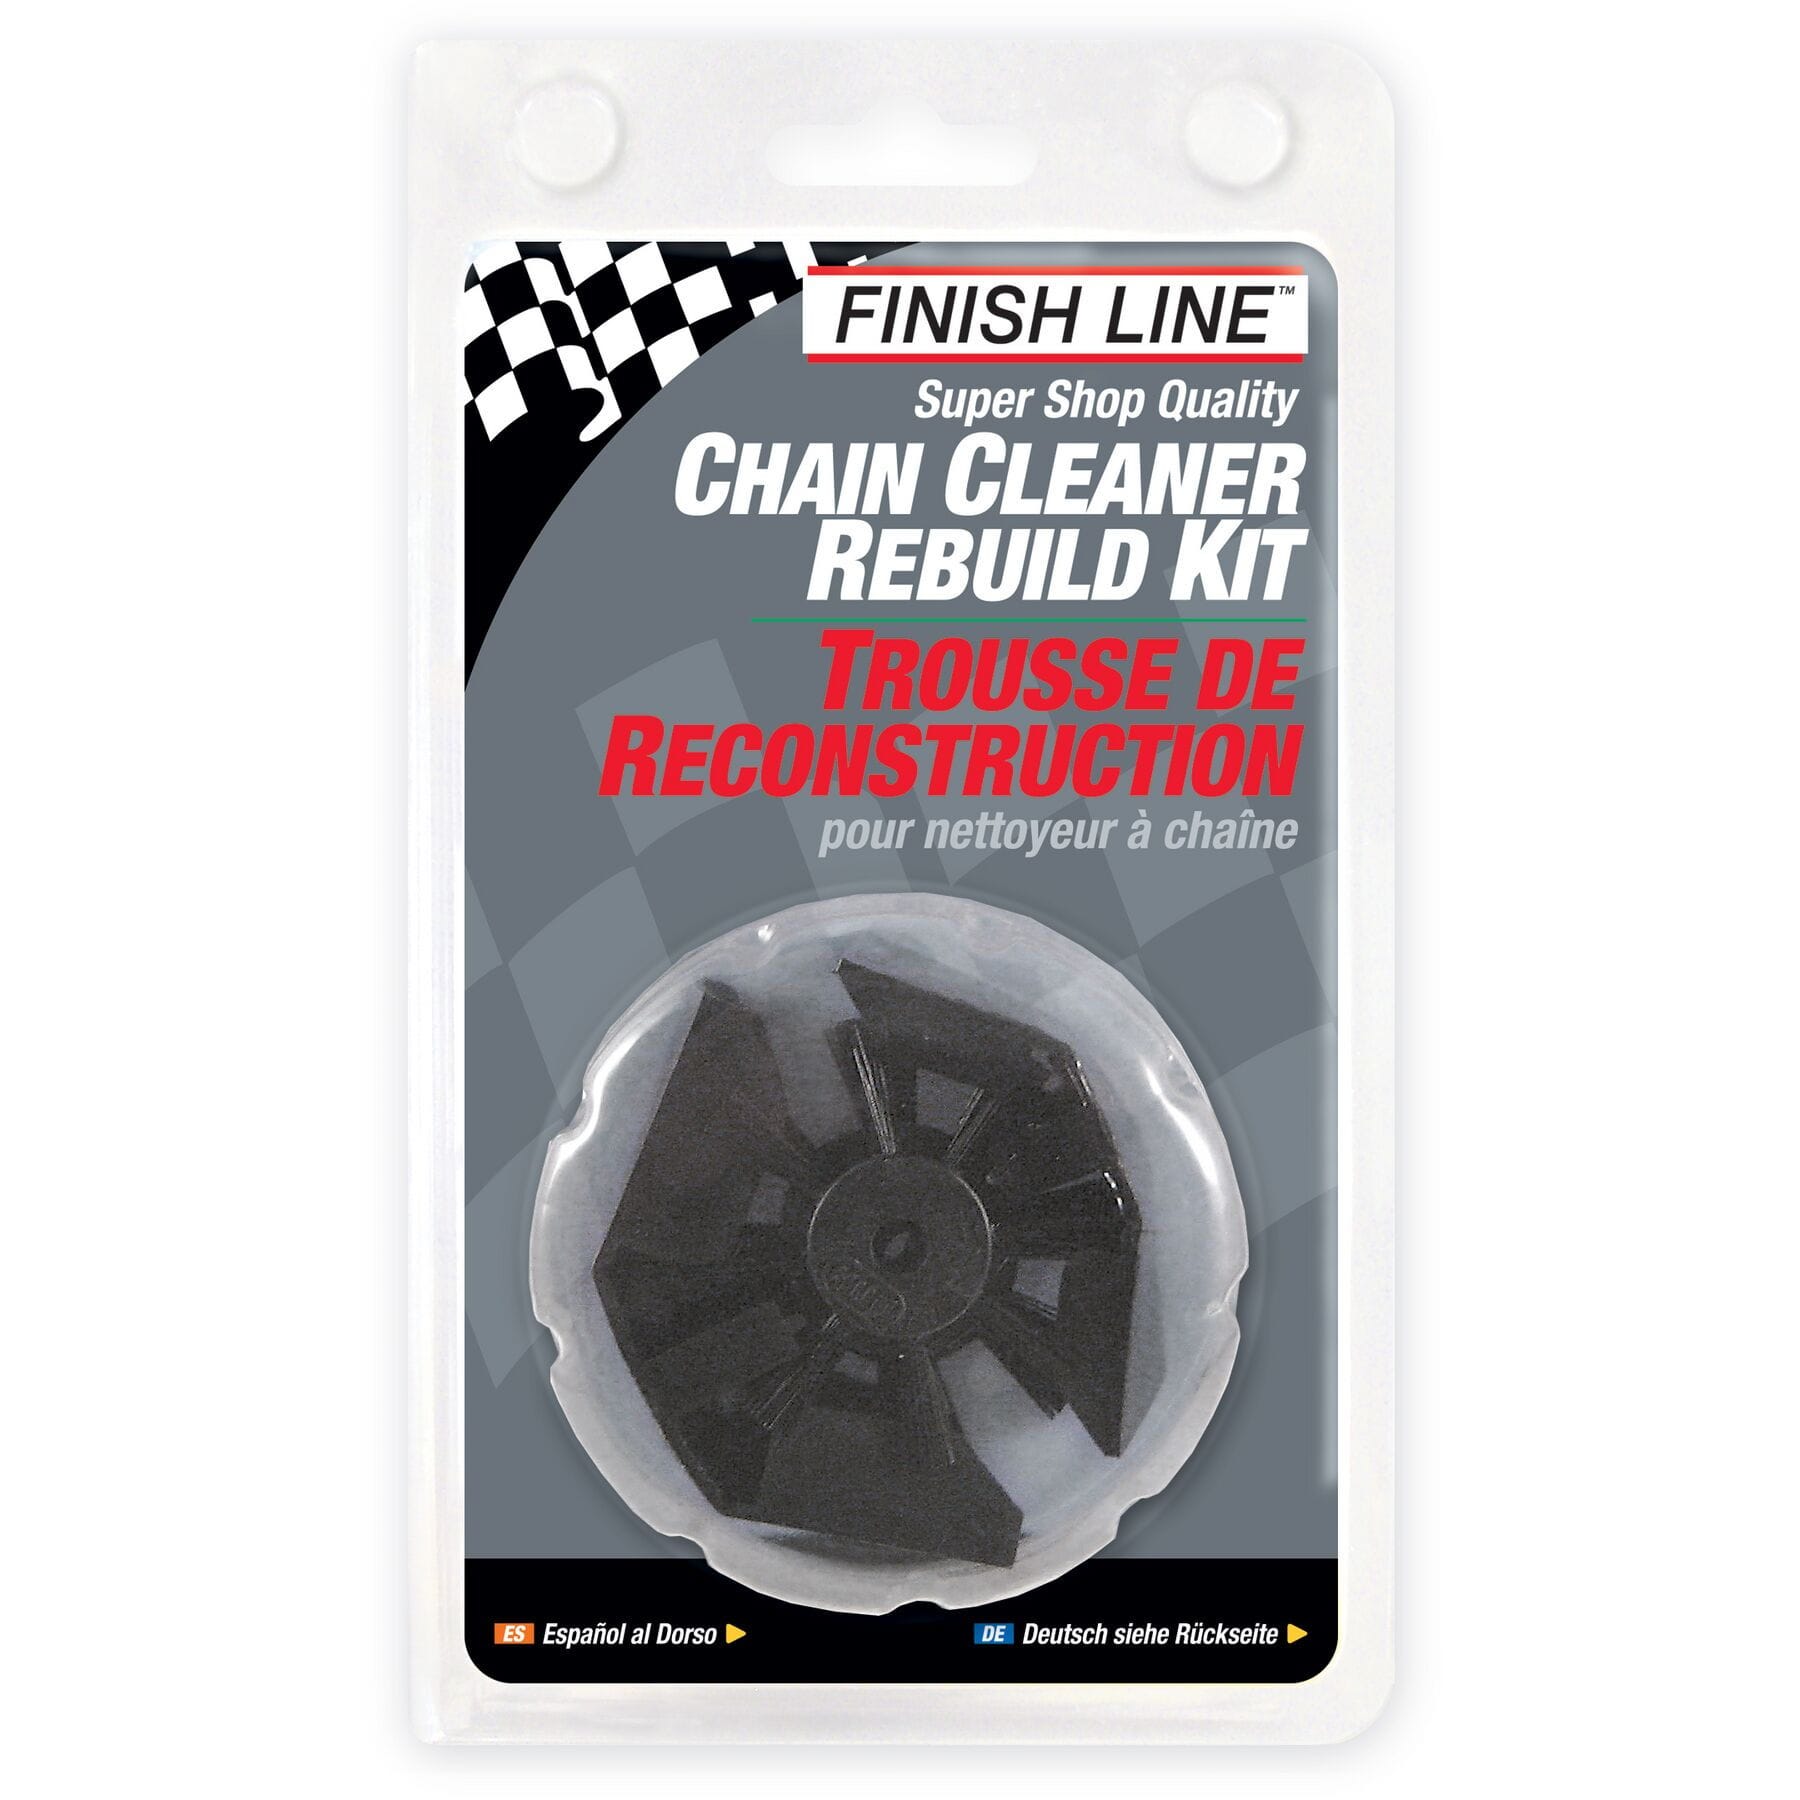 Finish Line Rebuild Kit for post-2004 Shop Quality Chain Cleaner